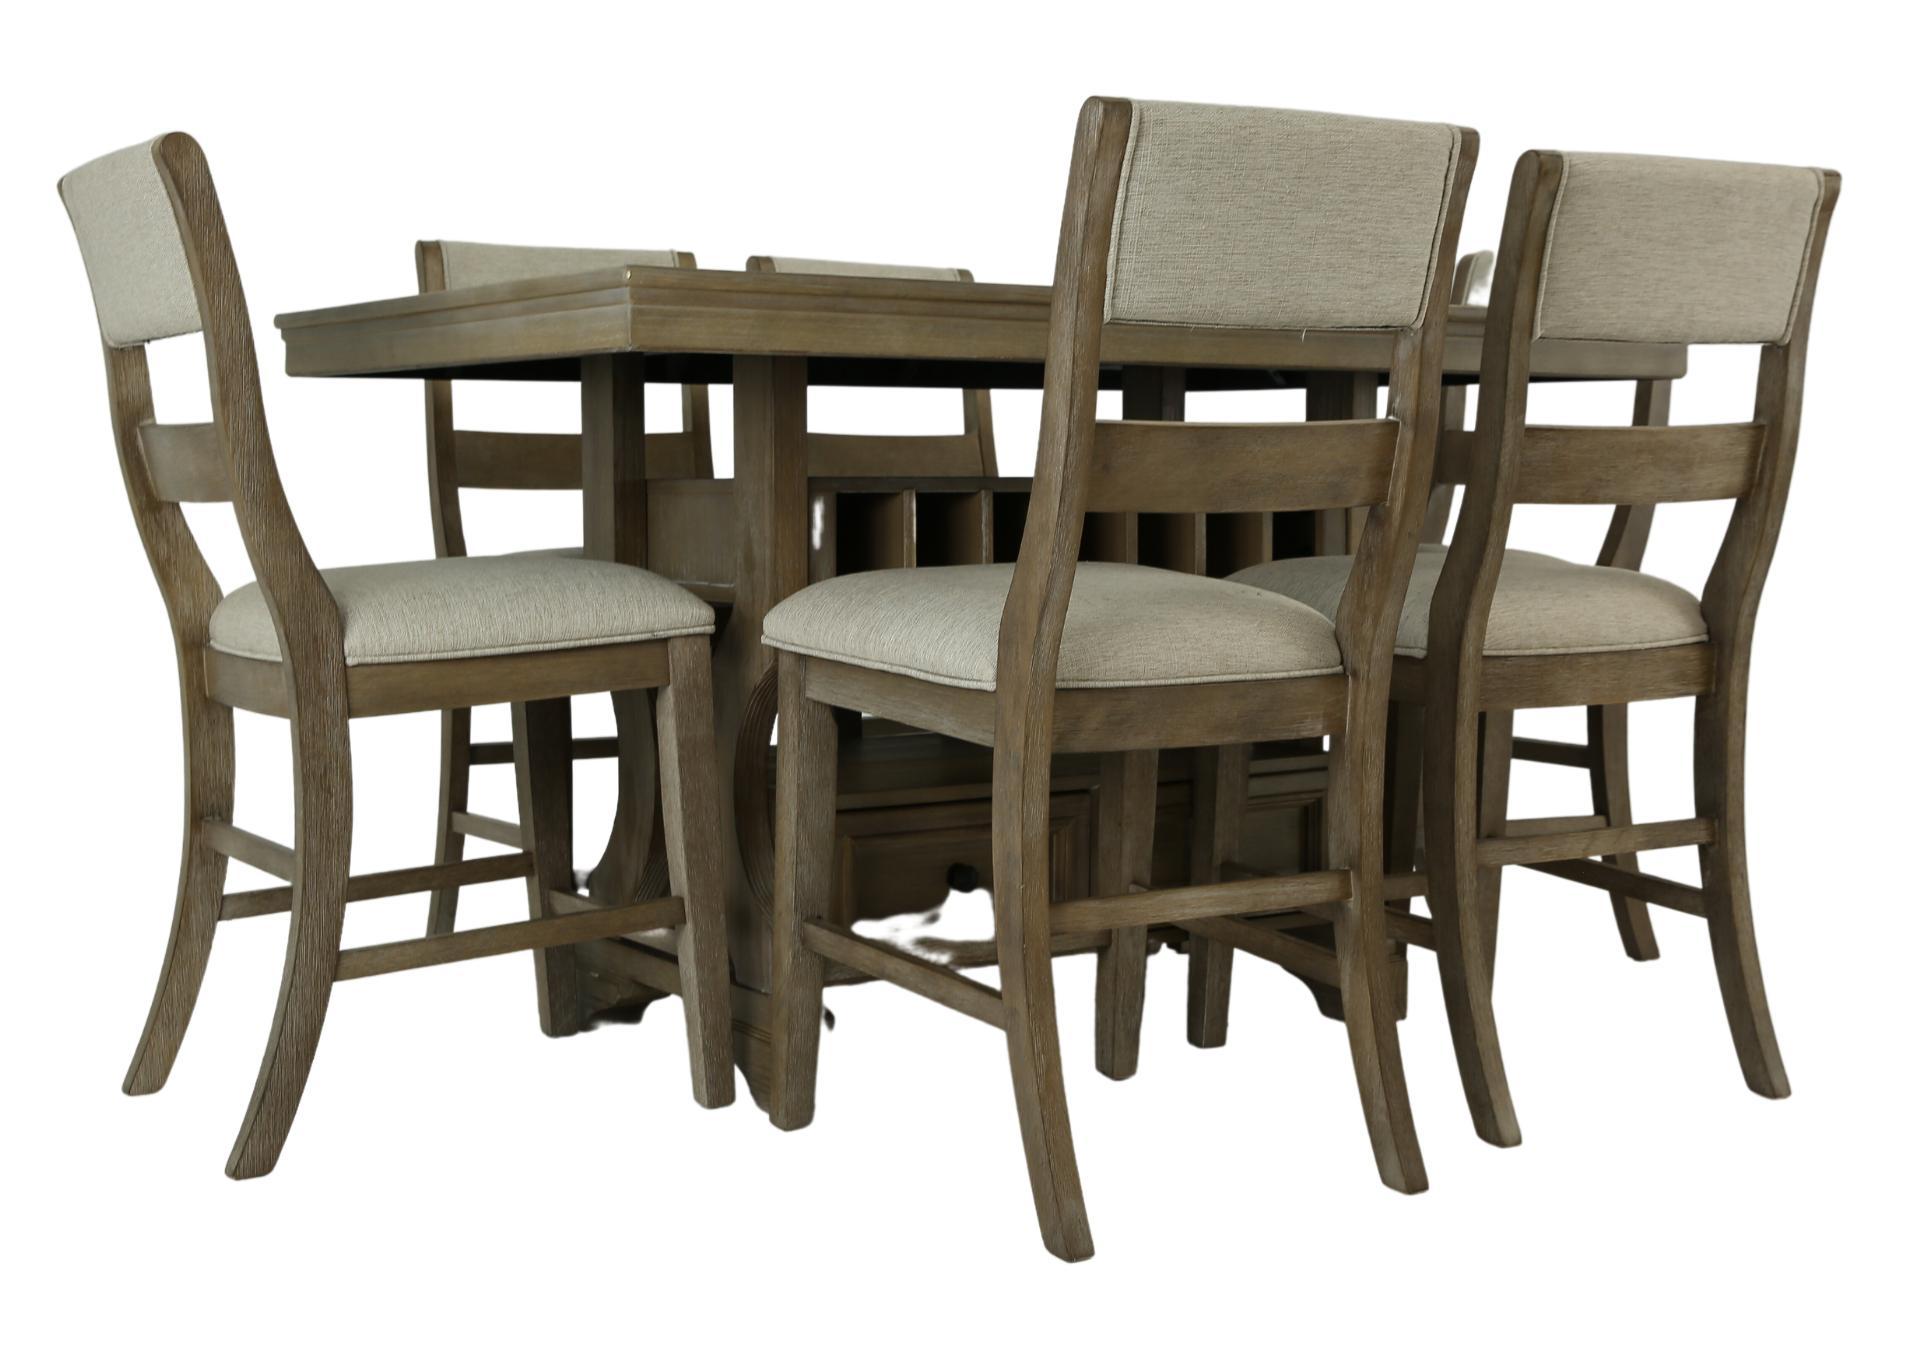 MORESHIRE 7 PIECE COUNTER HEIGHT DINING SET,ASHLEY FURNITURE INC.